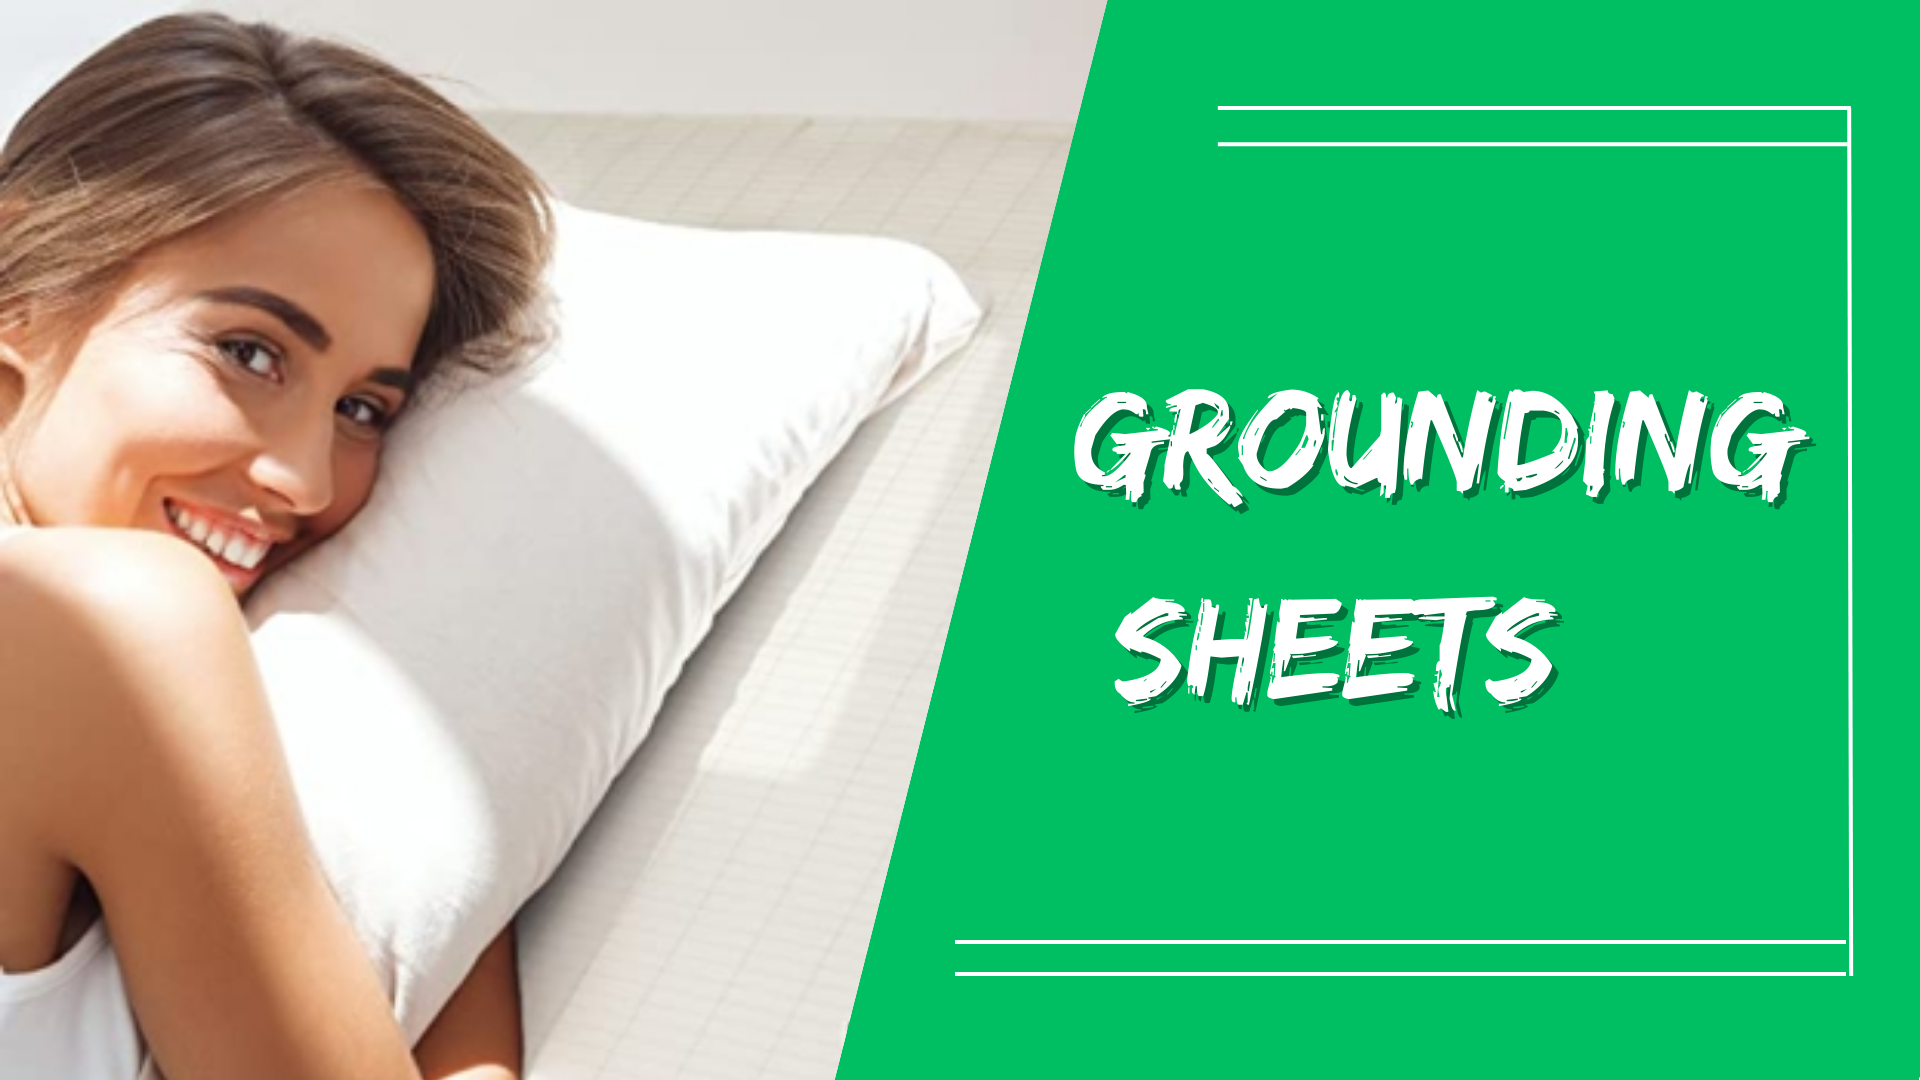 Grounding sheets and accessories